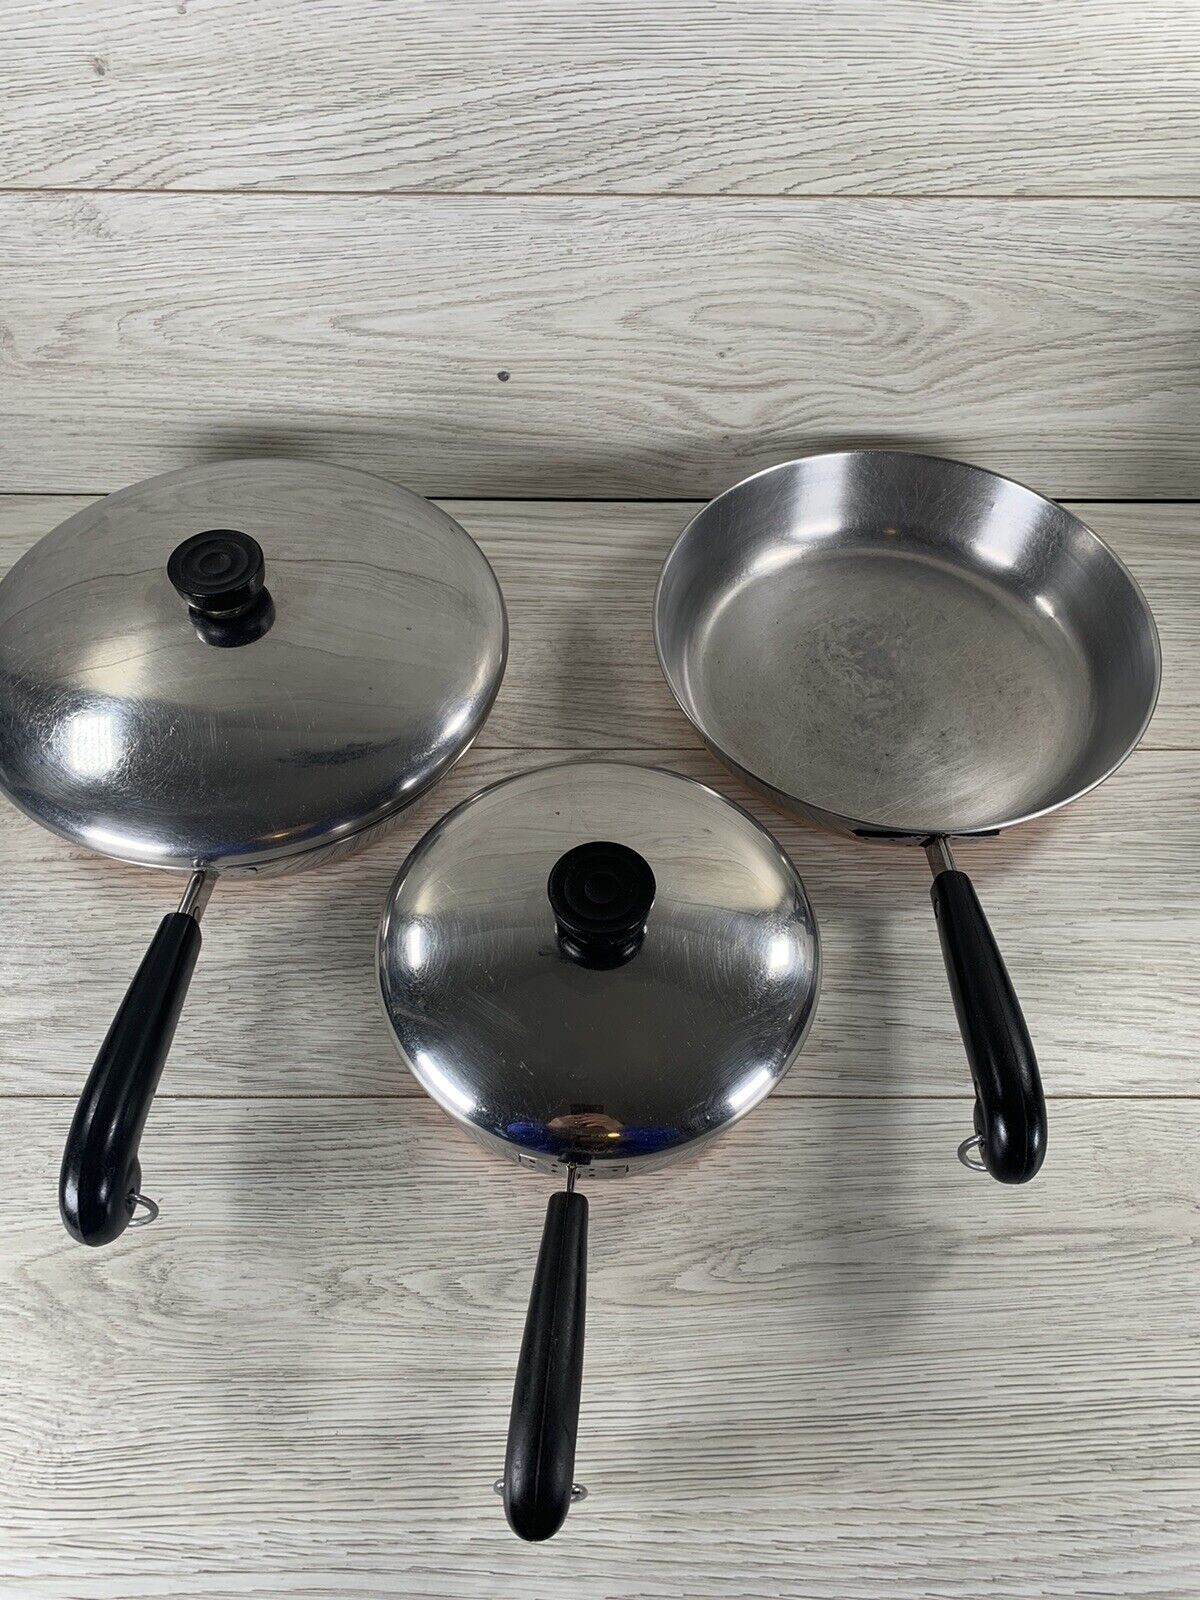 Revere Ware Skillets 3 Frying Pans w/ Lids 1801 Stainless & Copper Bottom 7” 10”